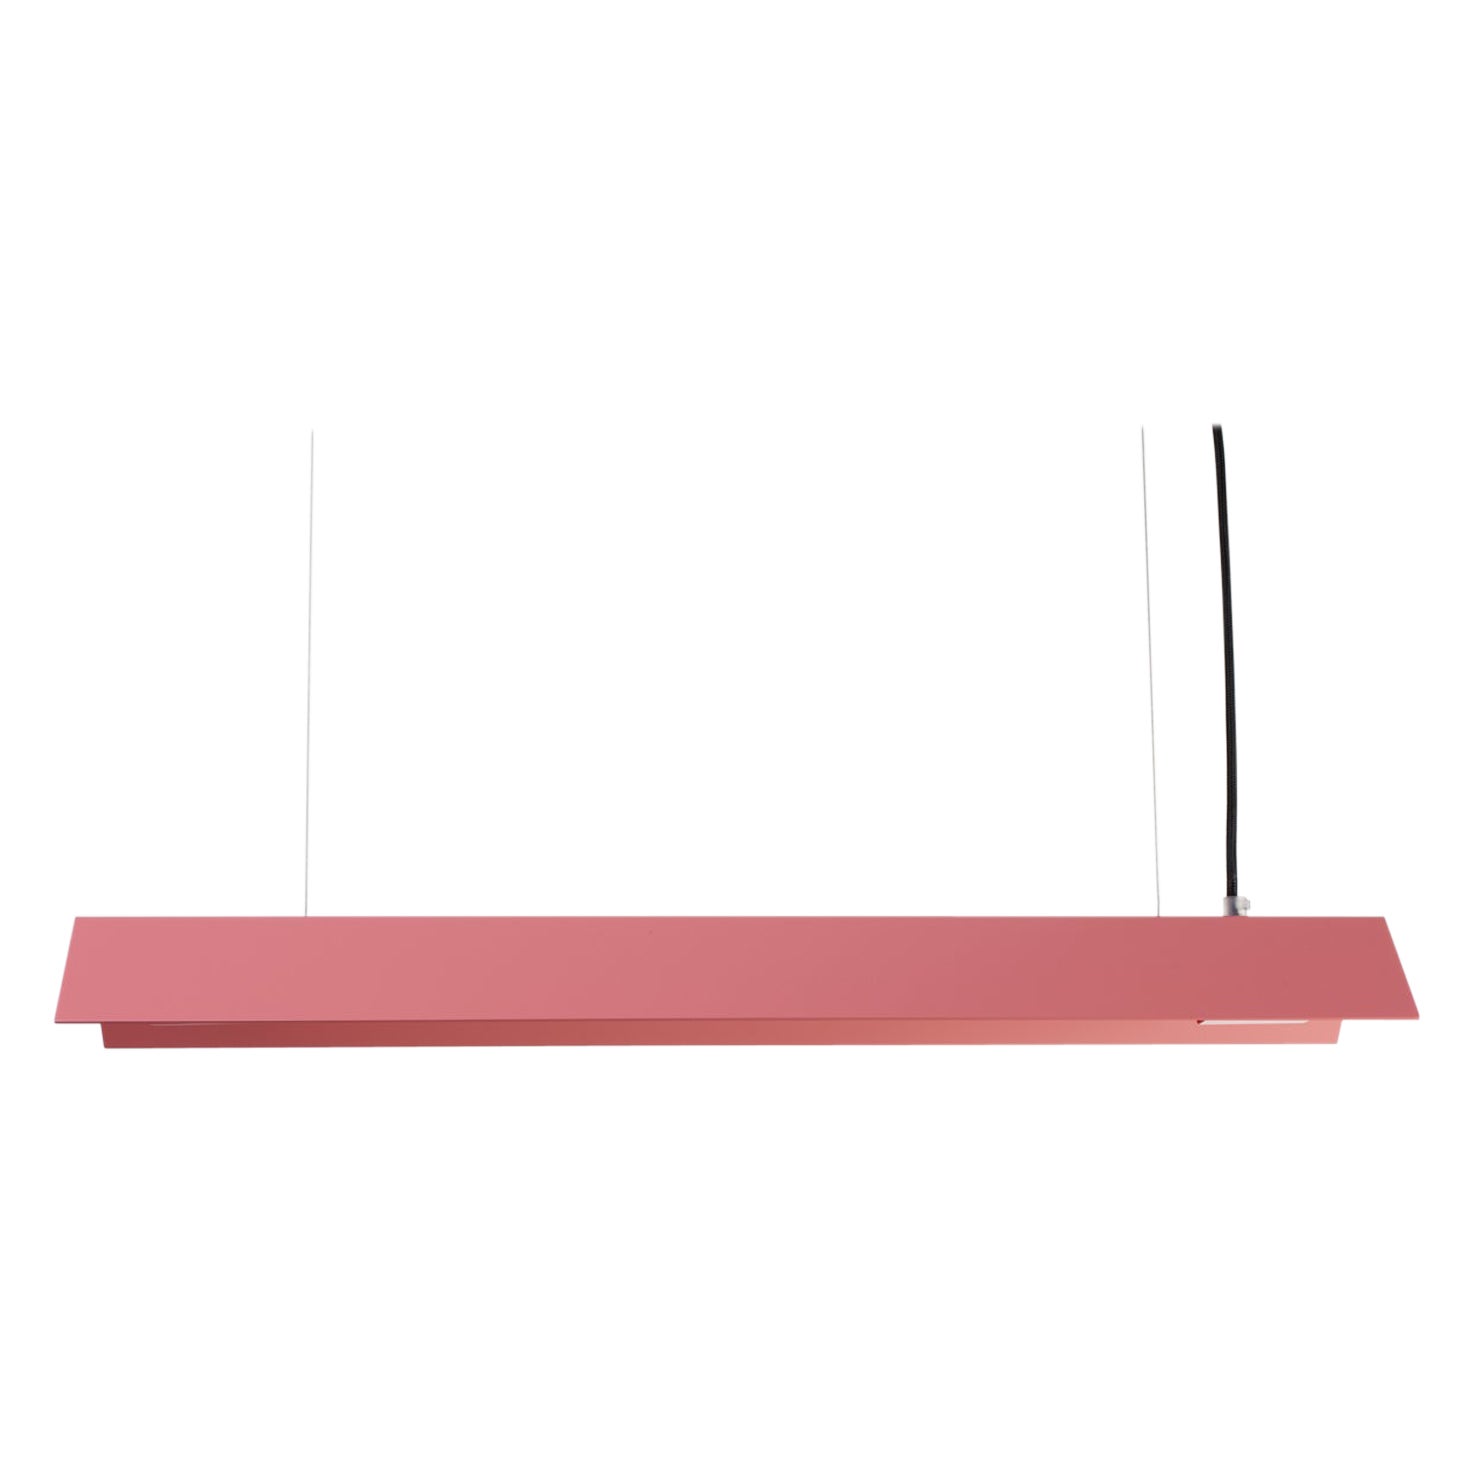 Small Misalliance Ral Antique Pink Suspended Light by Lexavala